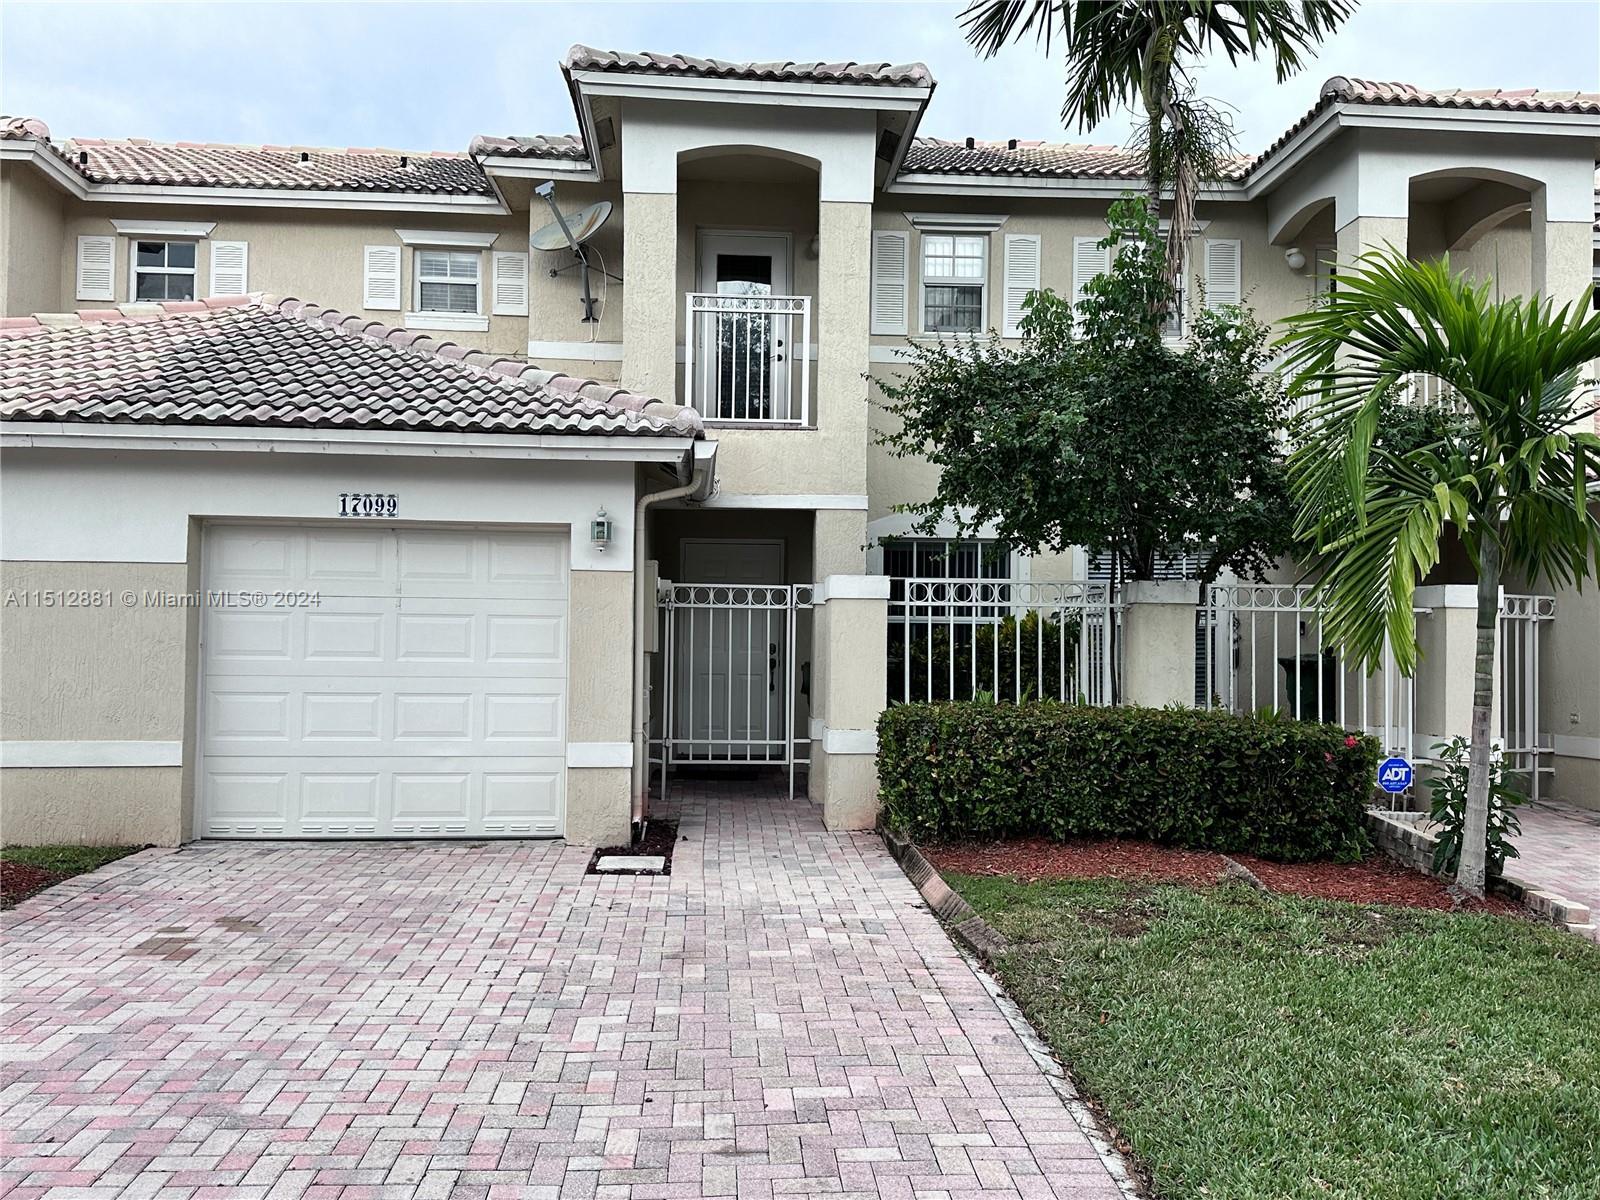 Photo of 17099 NW 23rd St #0 in Pembroke Pines, FL